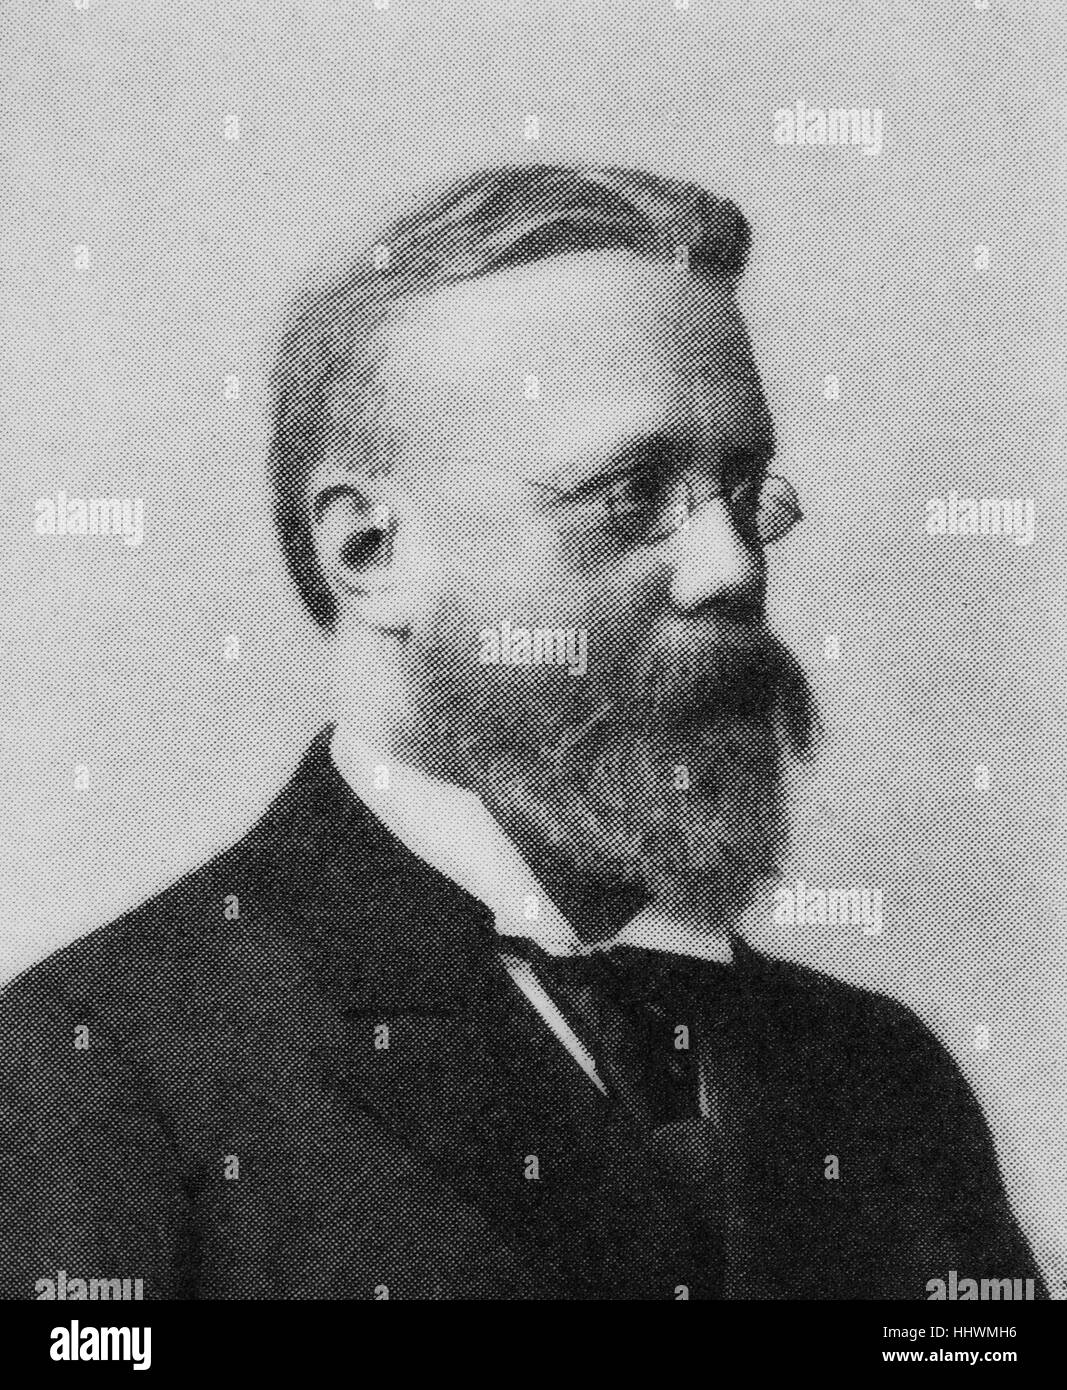 Friedrich Jolly, 1844 - 1904, German neurologist and psychiatrist, historical image or illustration, published 1890, digital improved Stock Photo